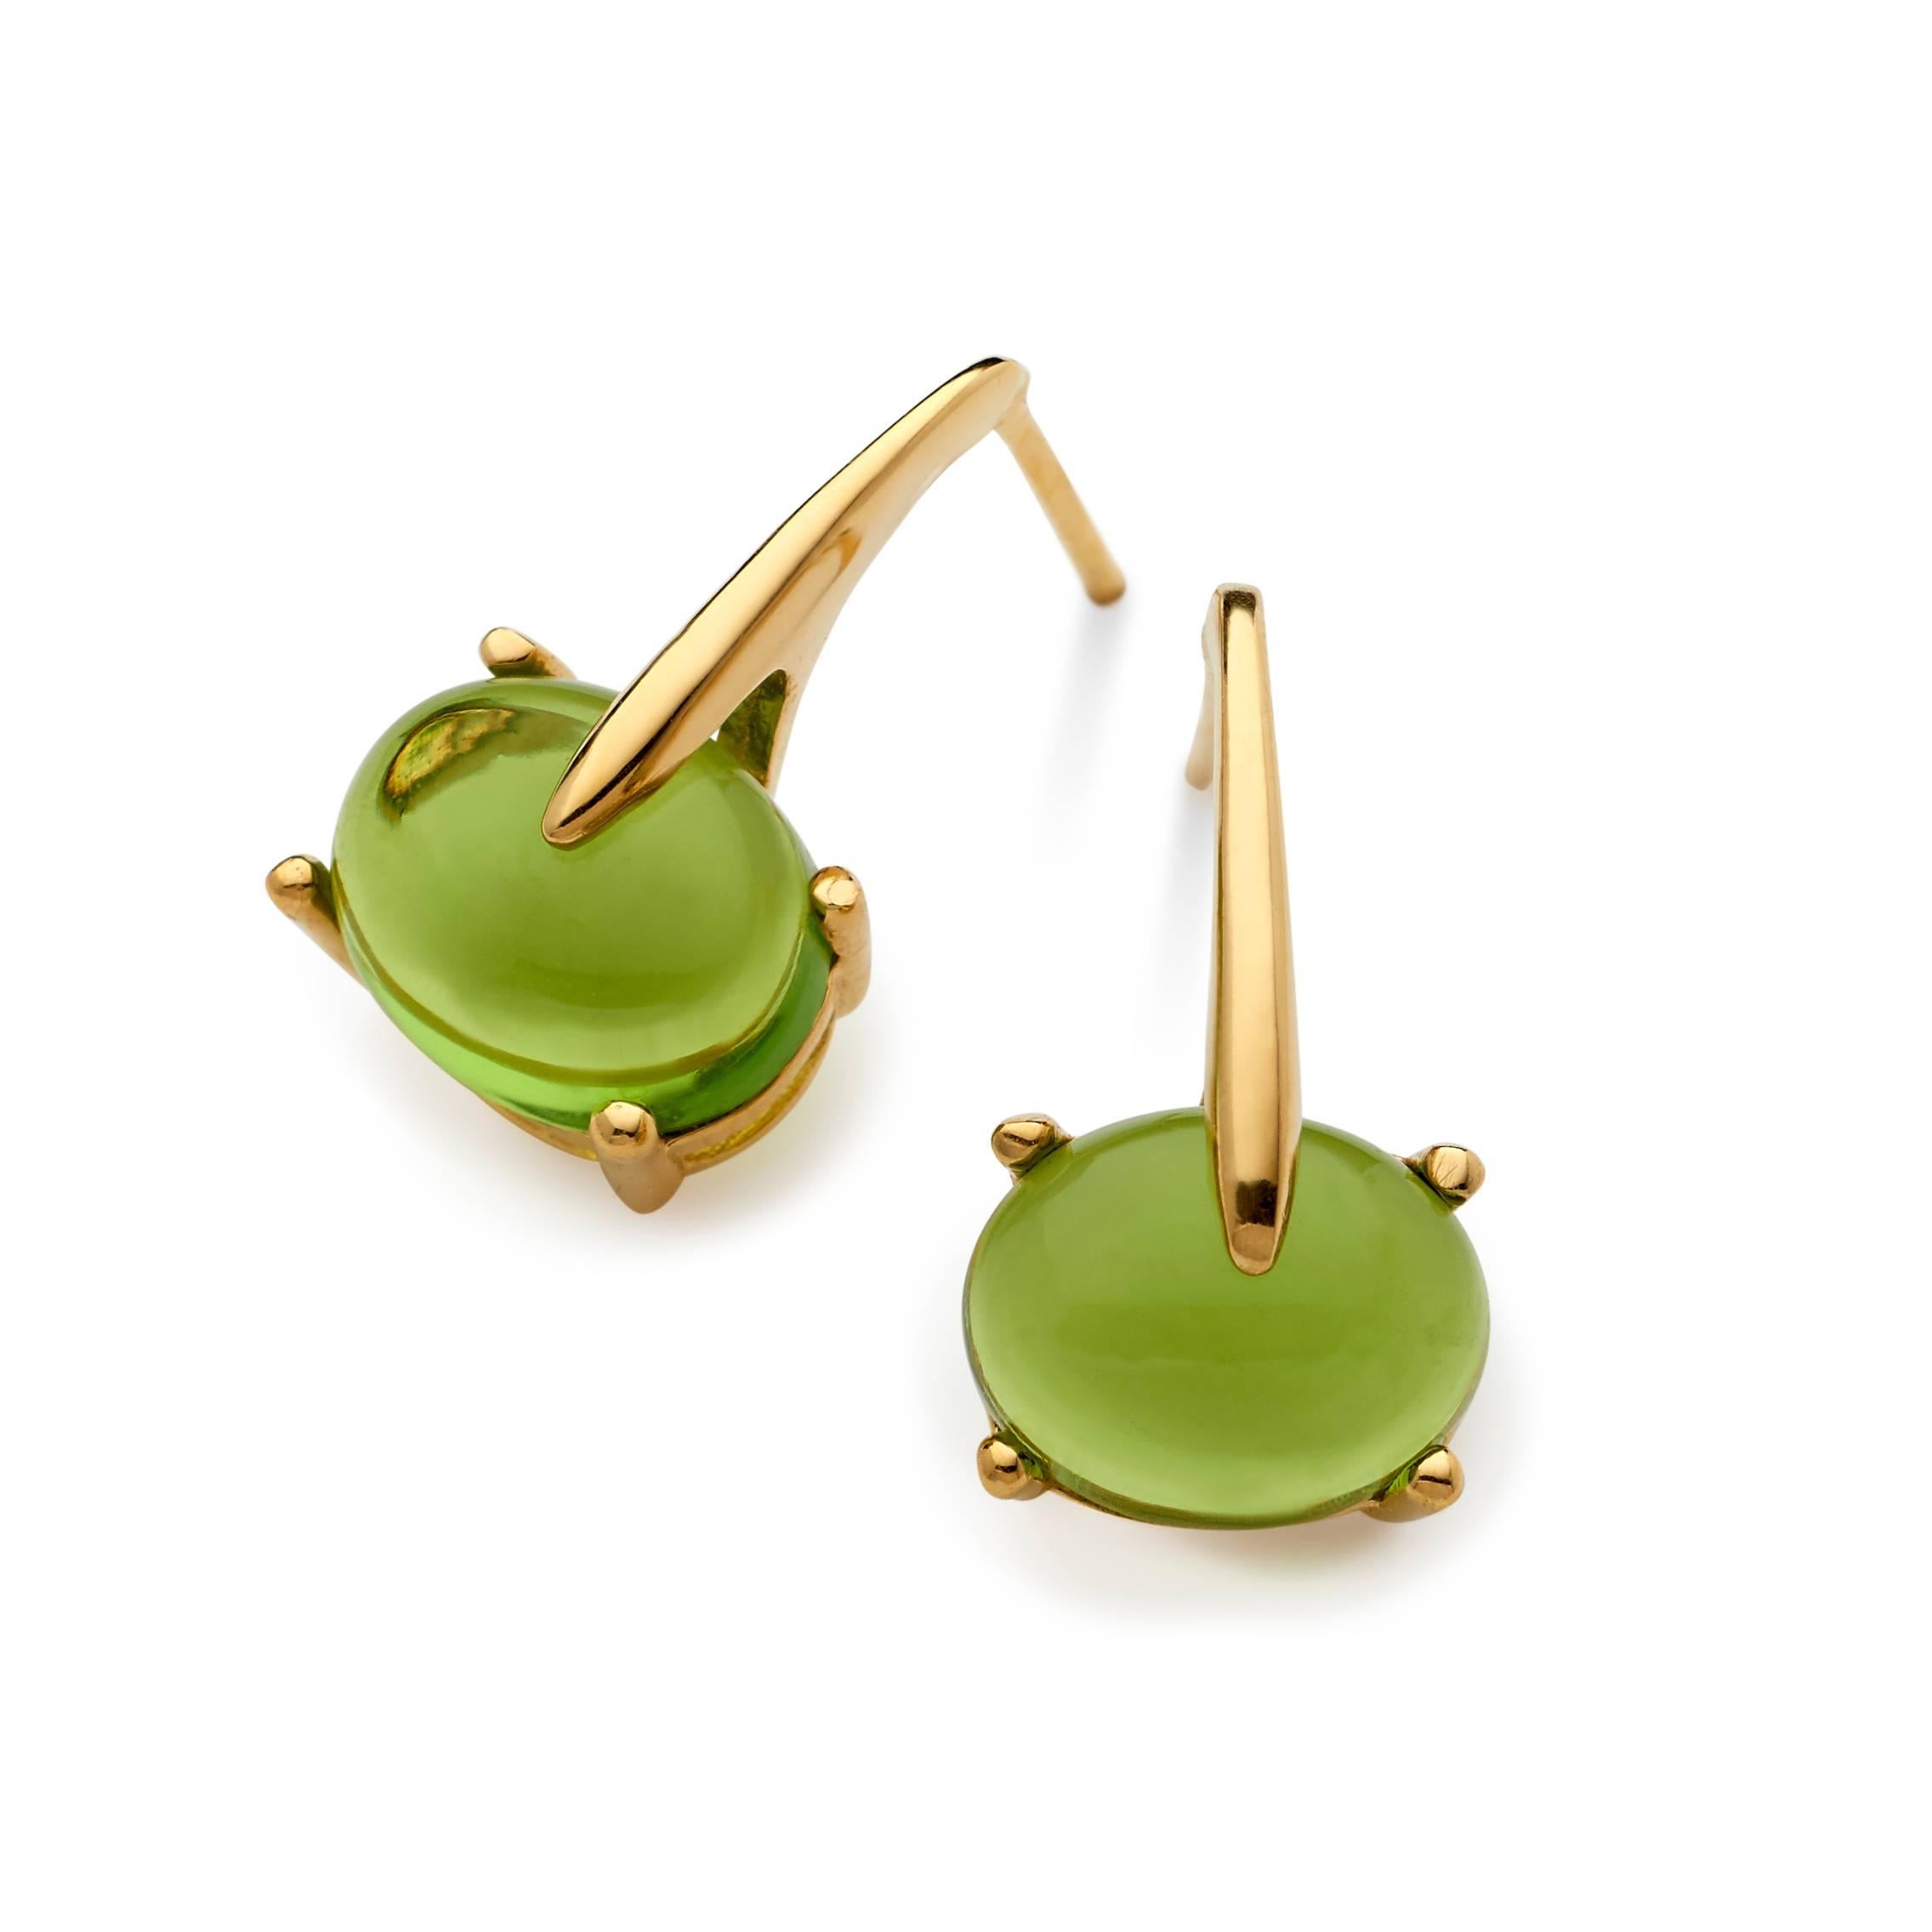 These modern, yet elegantly designed earrings work just as hard as you do. Wear them all day long and look smart and sophisticated. The total length of the earrings is 18mm, they are 10mm at their widest point, and the gently curved gold vertical